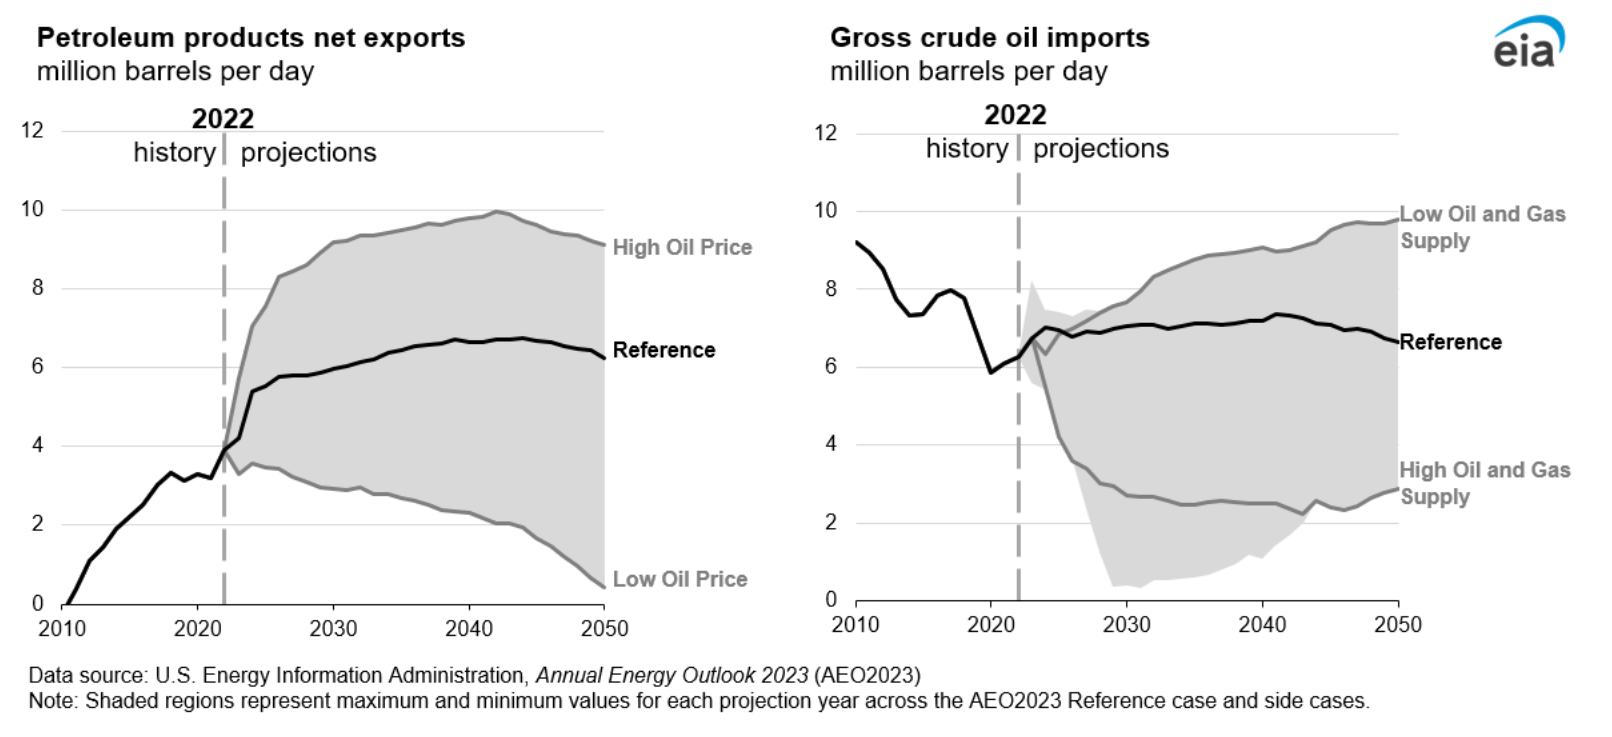 Figure 13. Petroleum products net exports; Gross crude oil imports